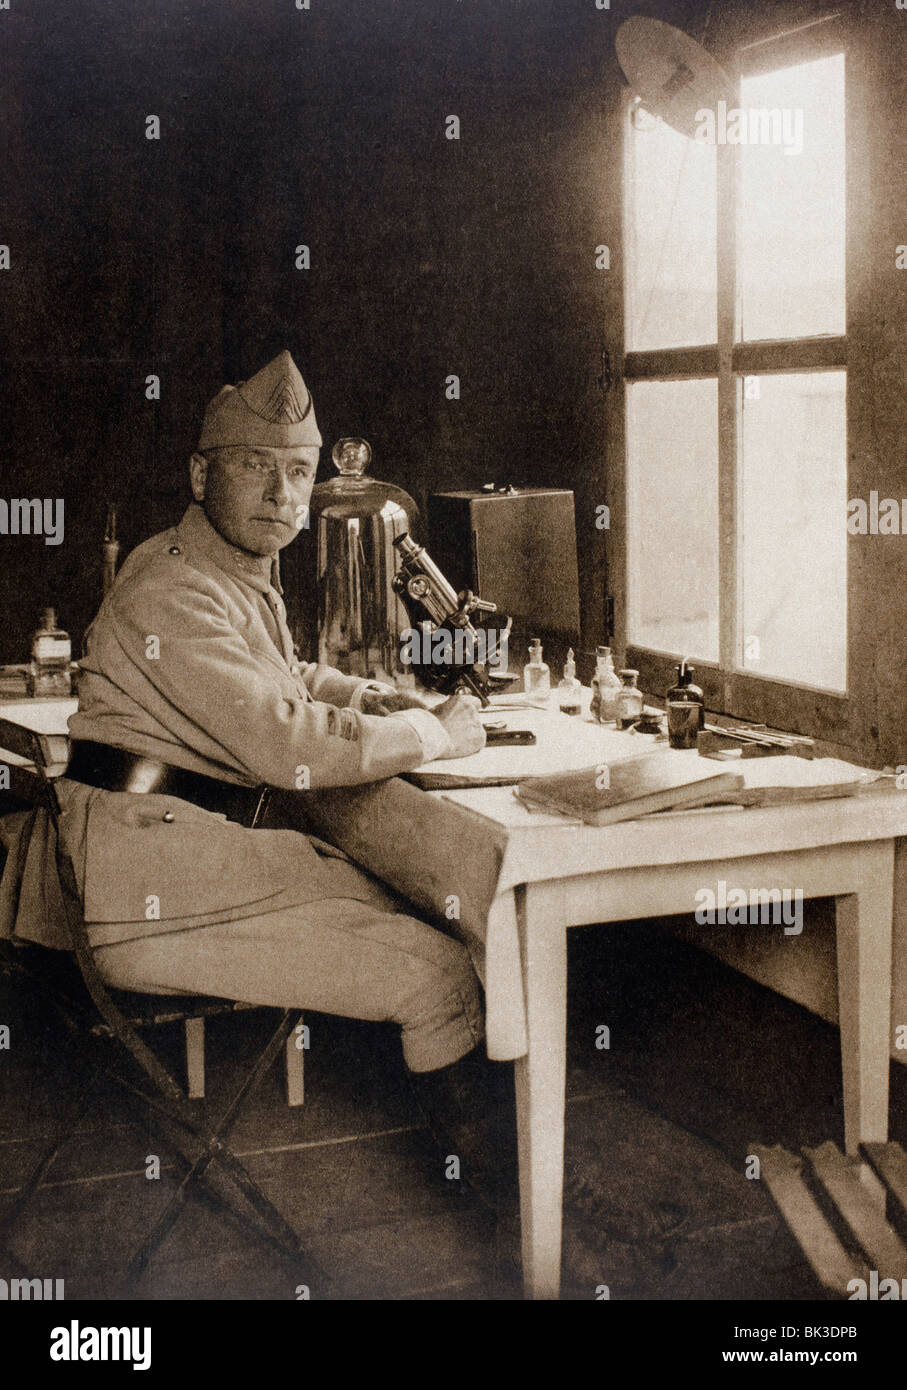 Alexis Carrel 1873 – 1944. French surgeon, biologist and eugenicist, winner of Nobel Prize in Physiology or Medicine, 1912. Stock Photo